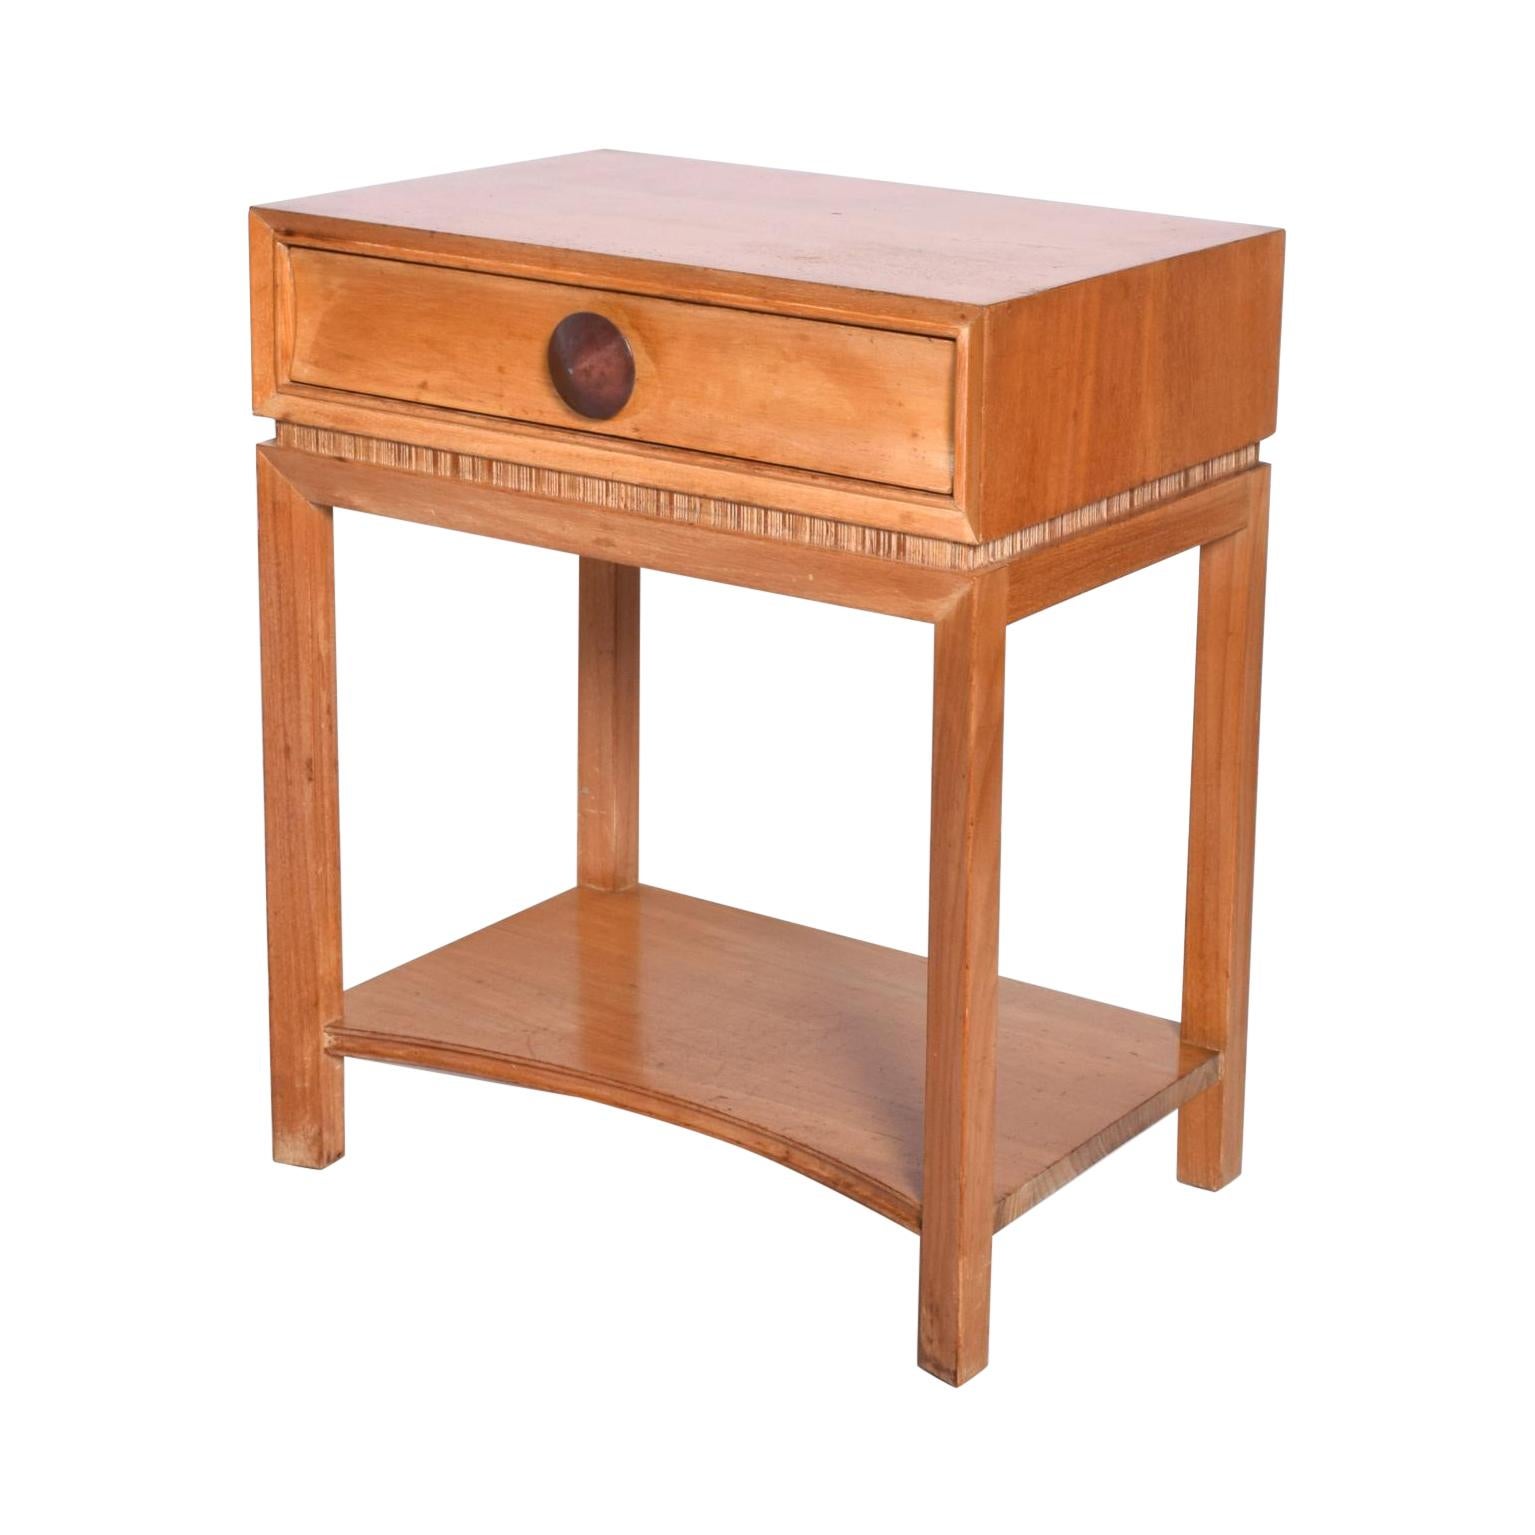 AMBIANIC presents
Paul Frankl sculptural nightstand side table for Brown Saltman.
Art deco fancy drawer pull
Maker tag present
24.25 H x 20W x 14.5 D
Blonde mahogany. Elegant presentation.
Original unrestored vintage preowned condition.
Refer to